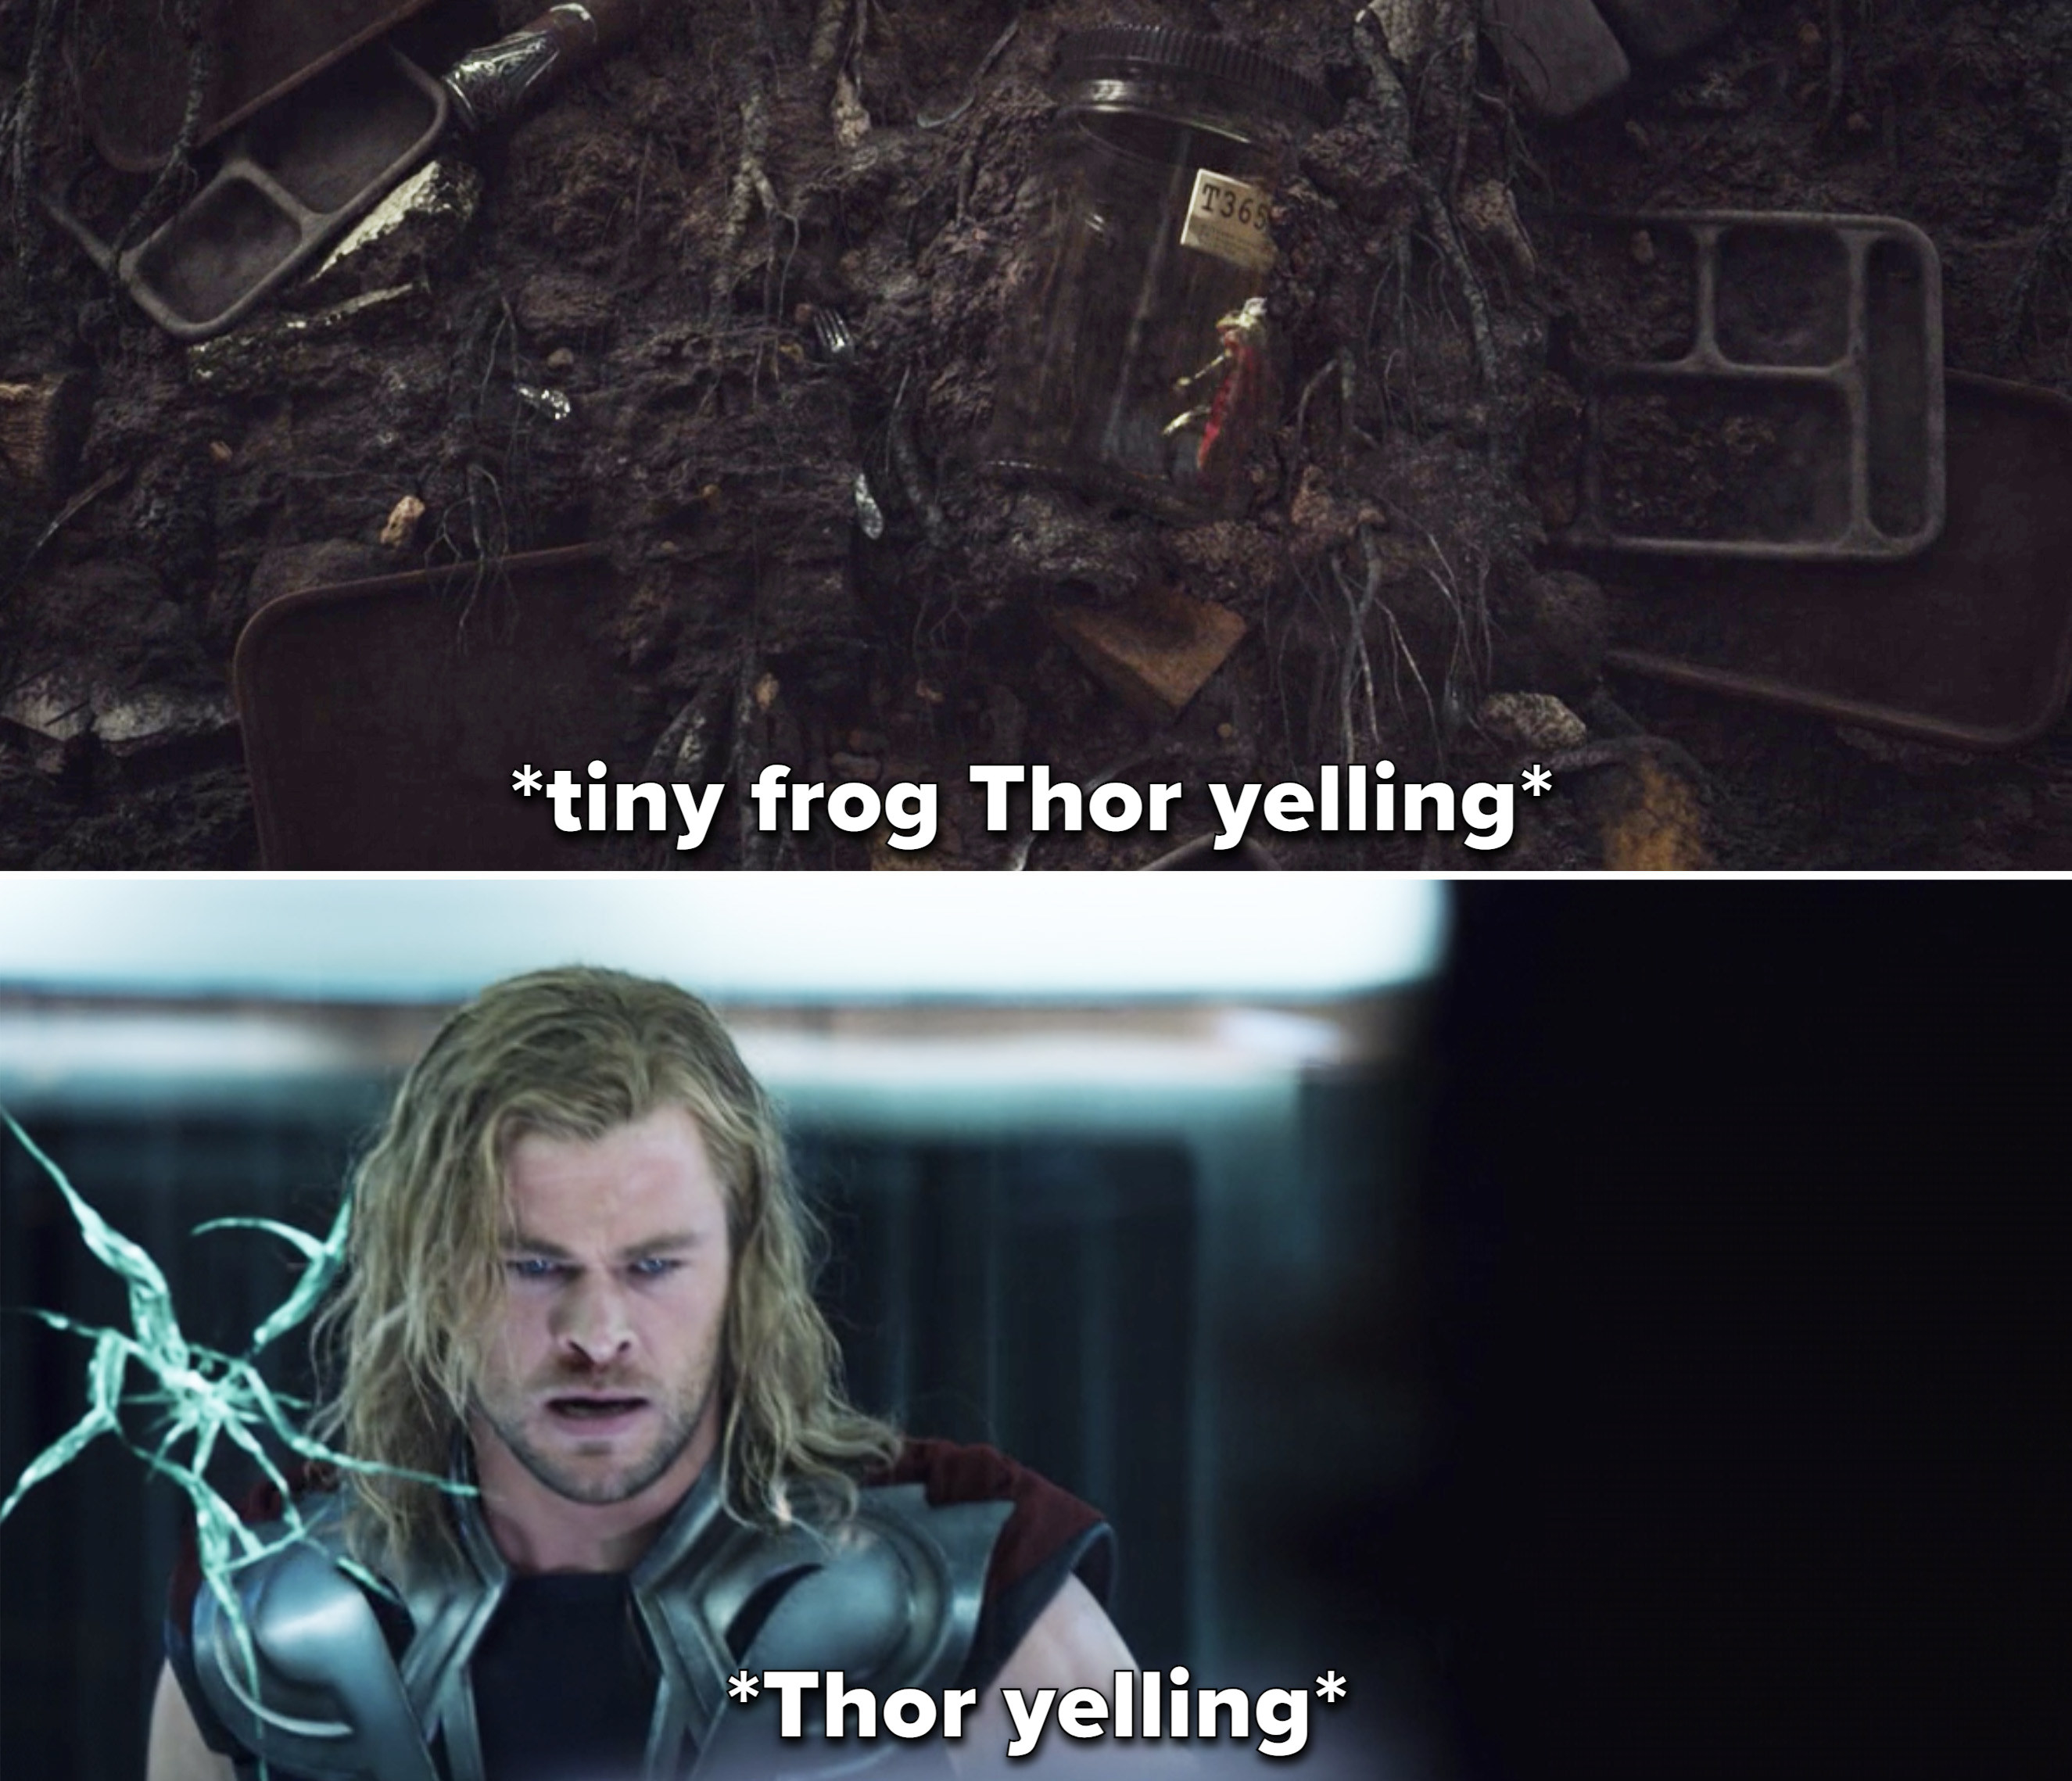 Frog Thor trapped in a glass bottle vs. Thor trapped behind glass